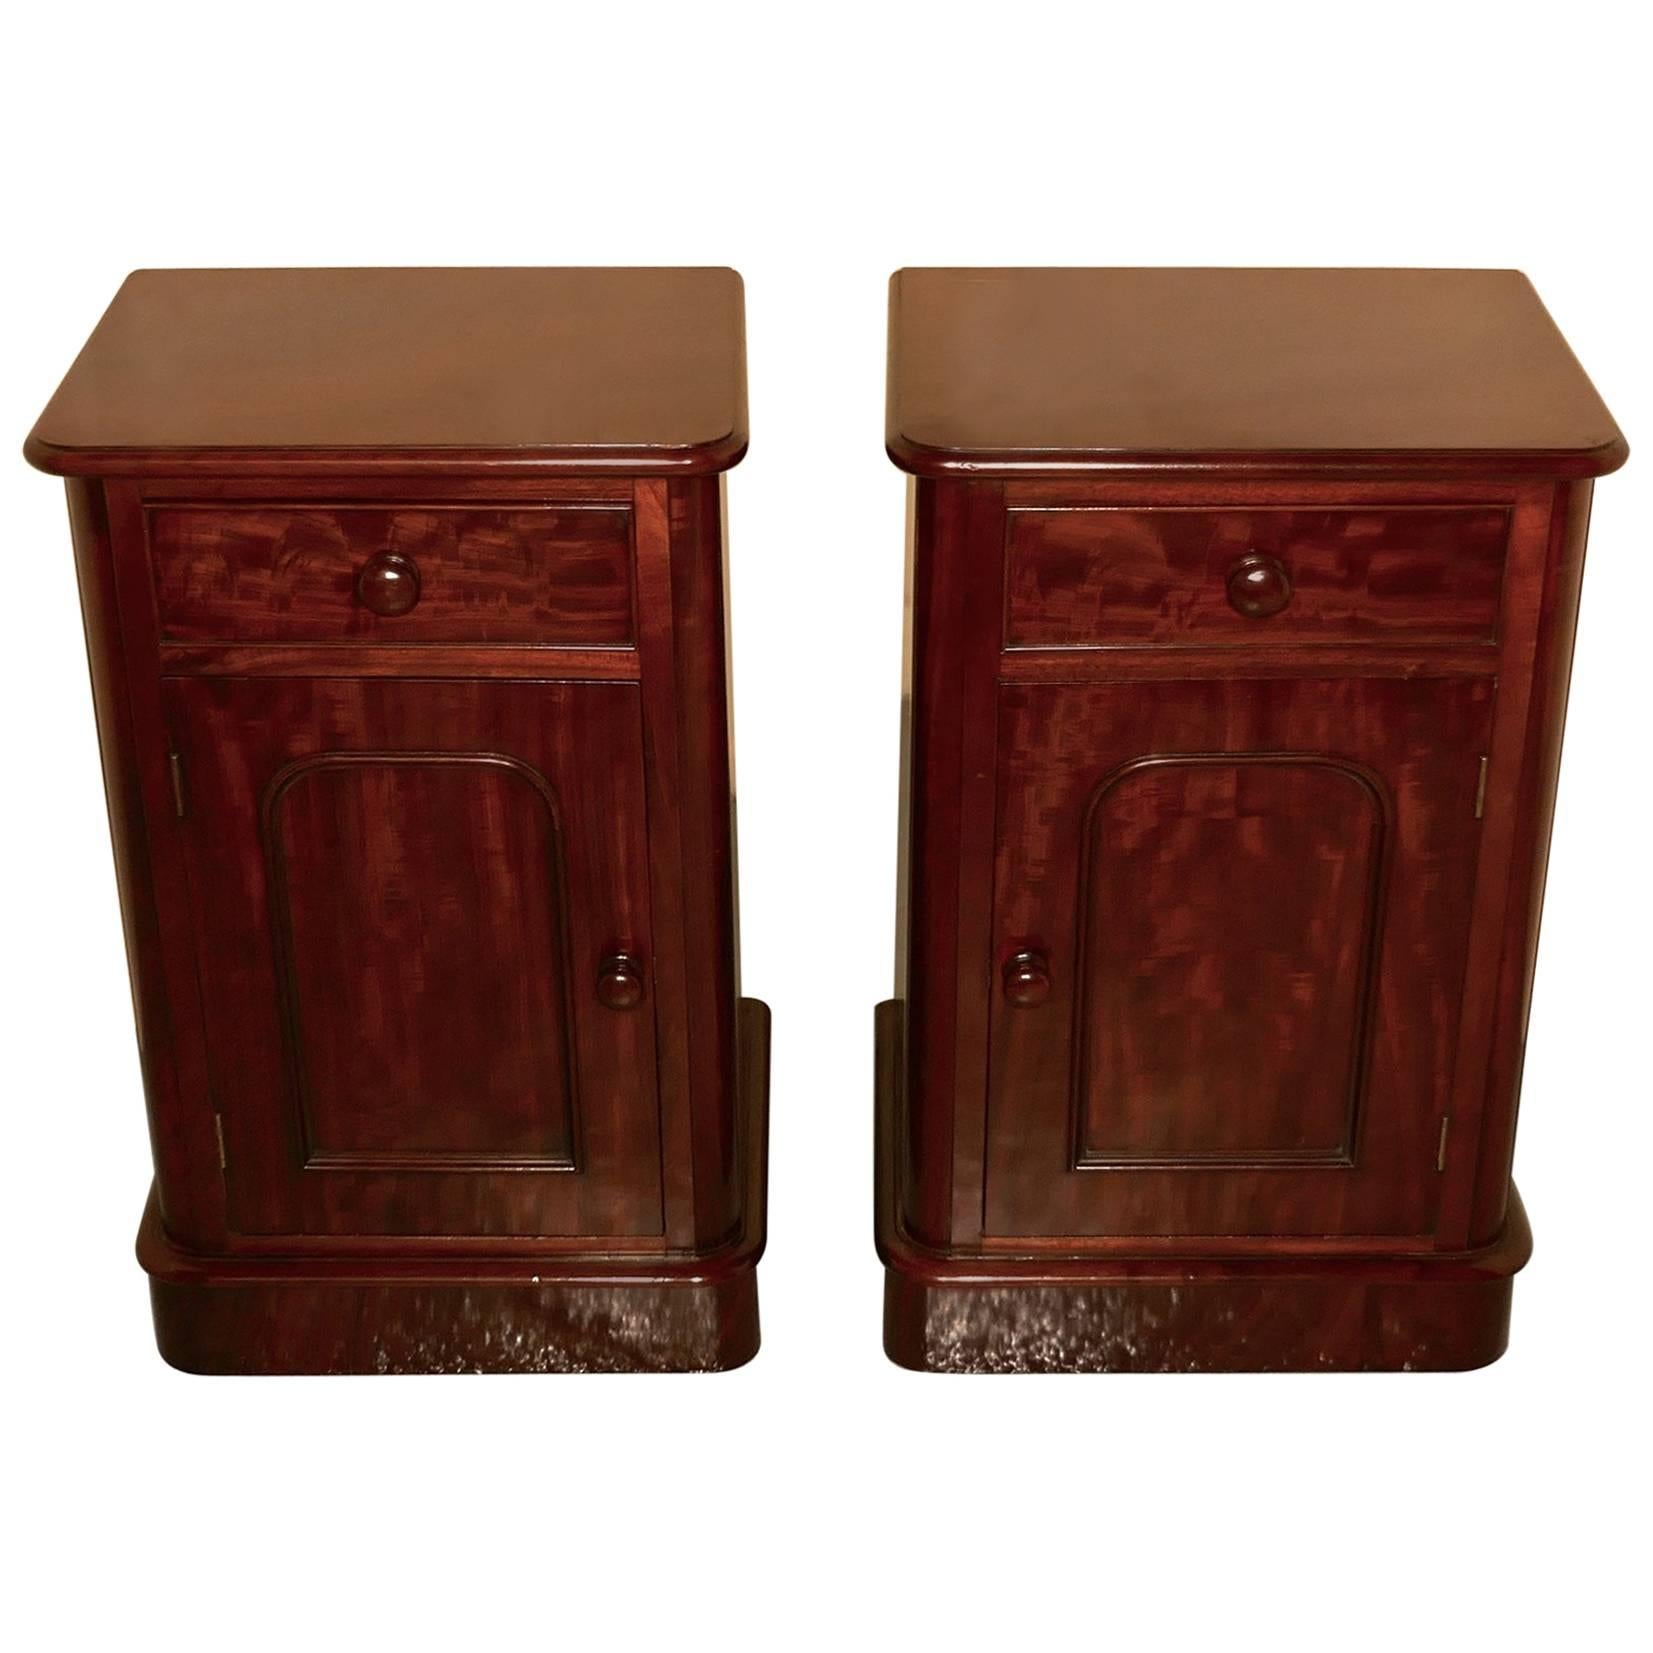 Pair of Victorian Mahogany Bedside Cupboards